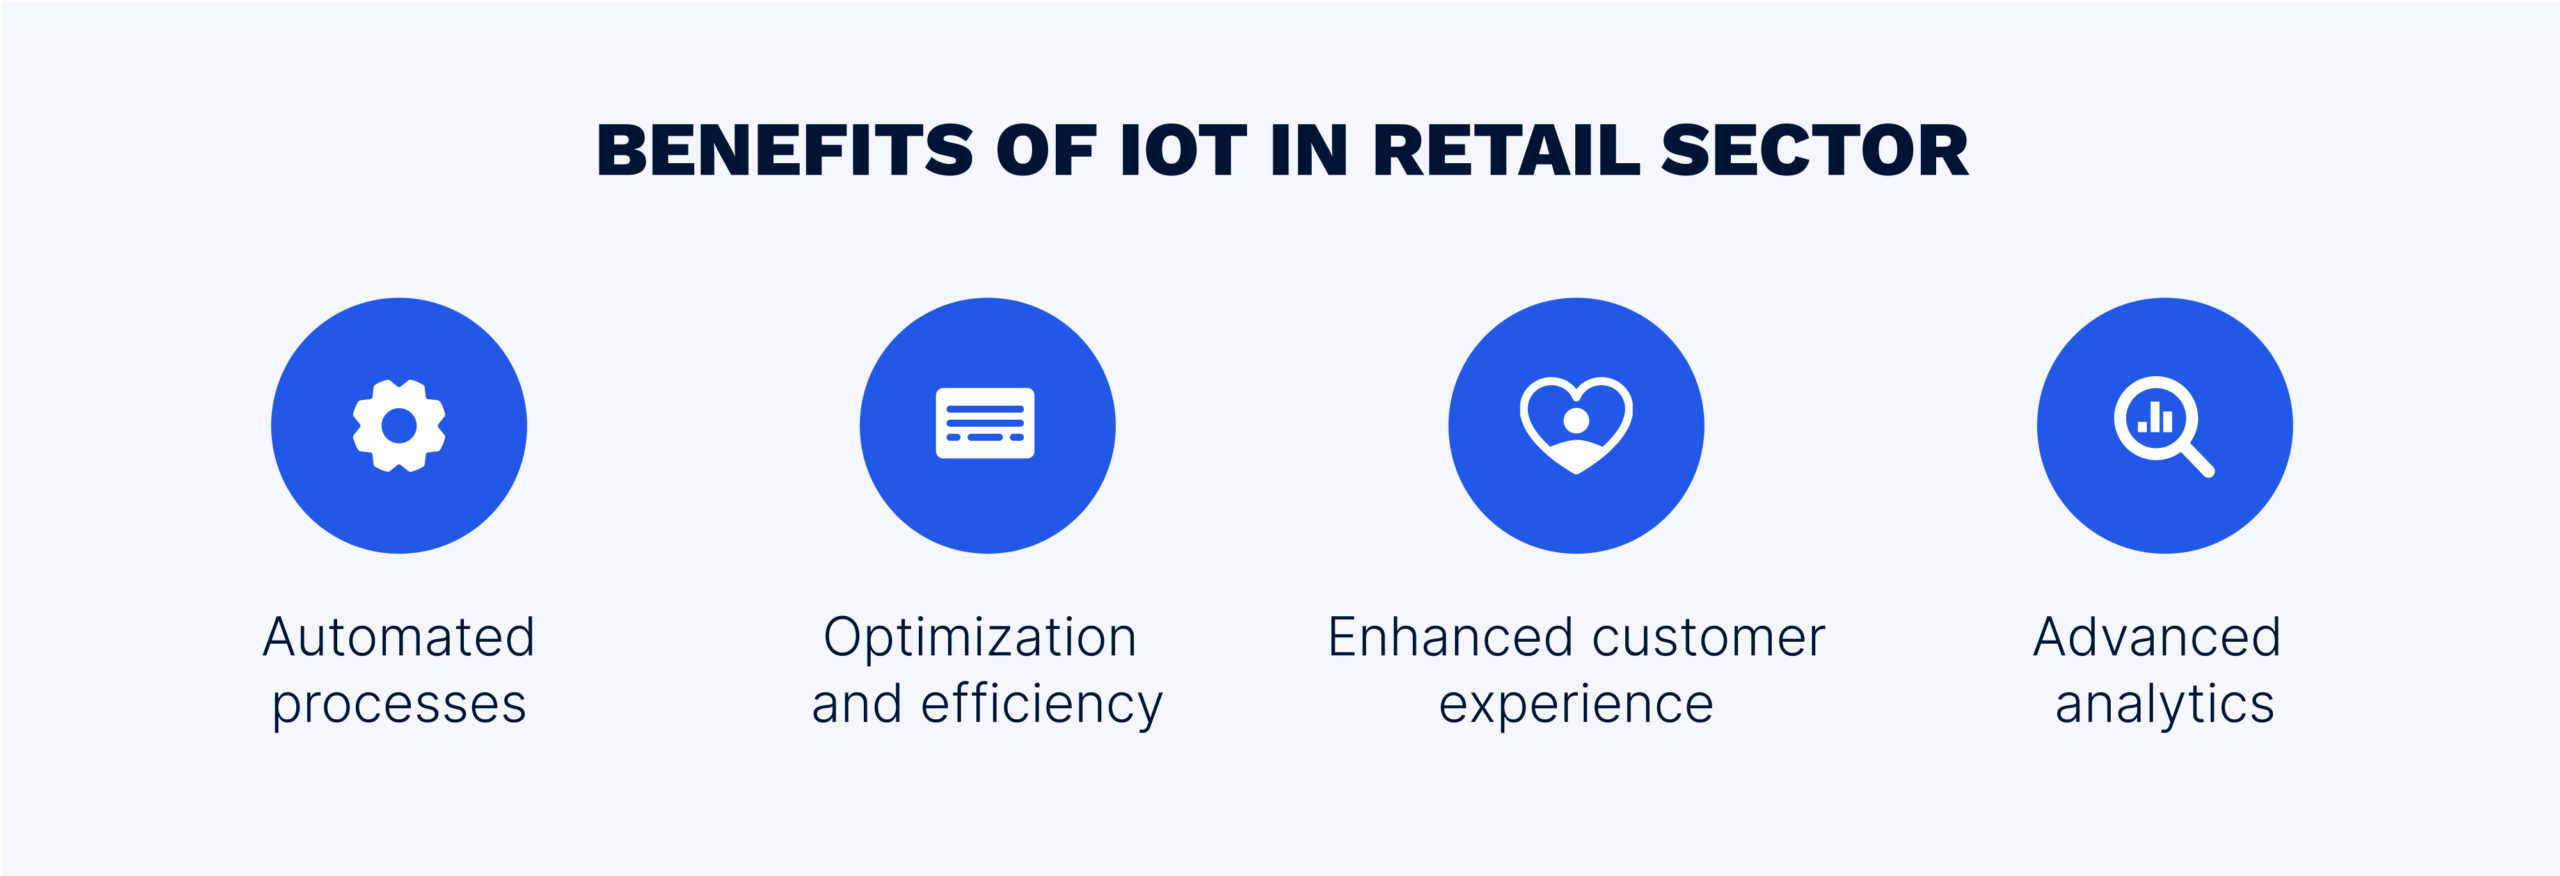 The Internet of Things in the retail industry - applications and use cases